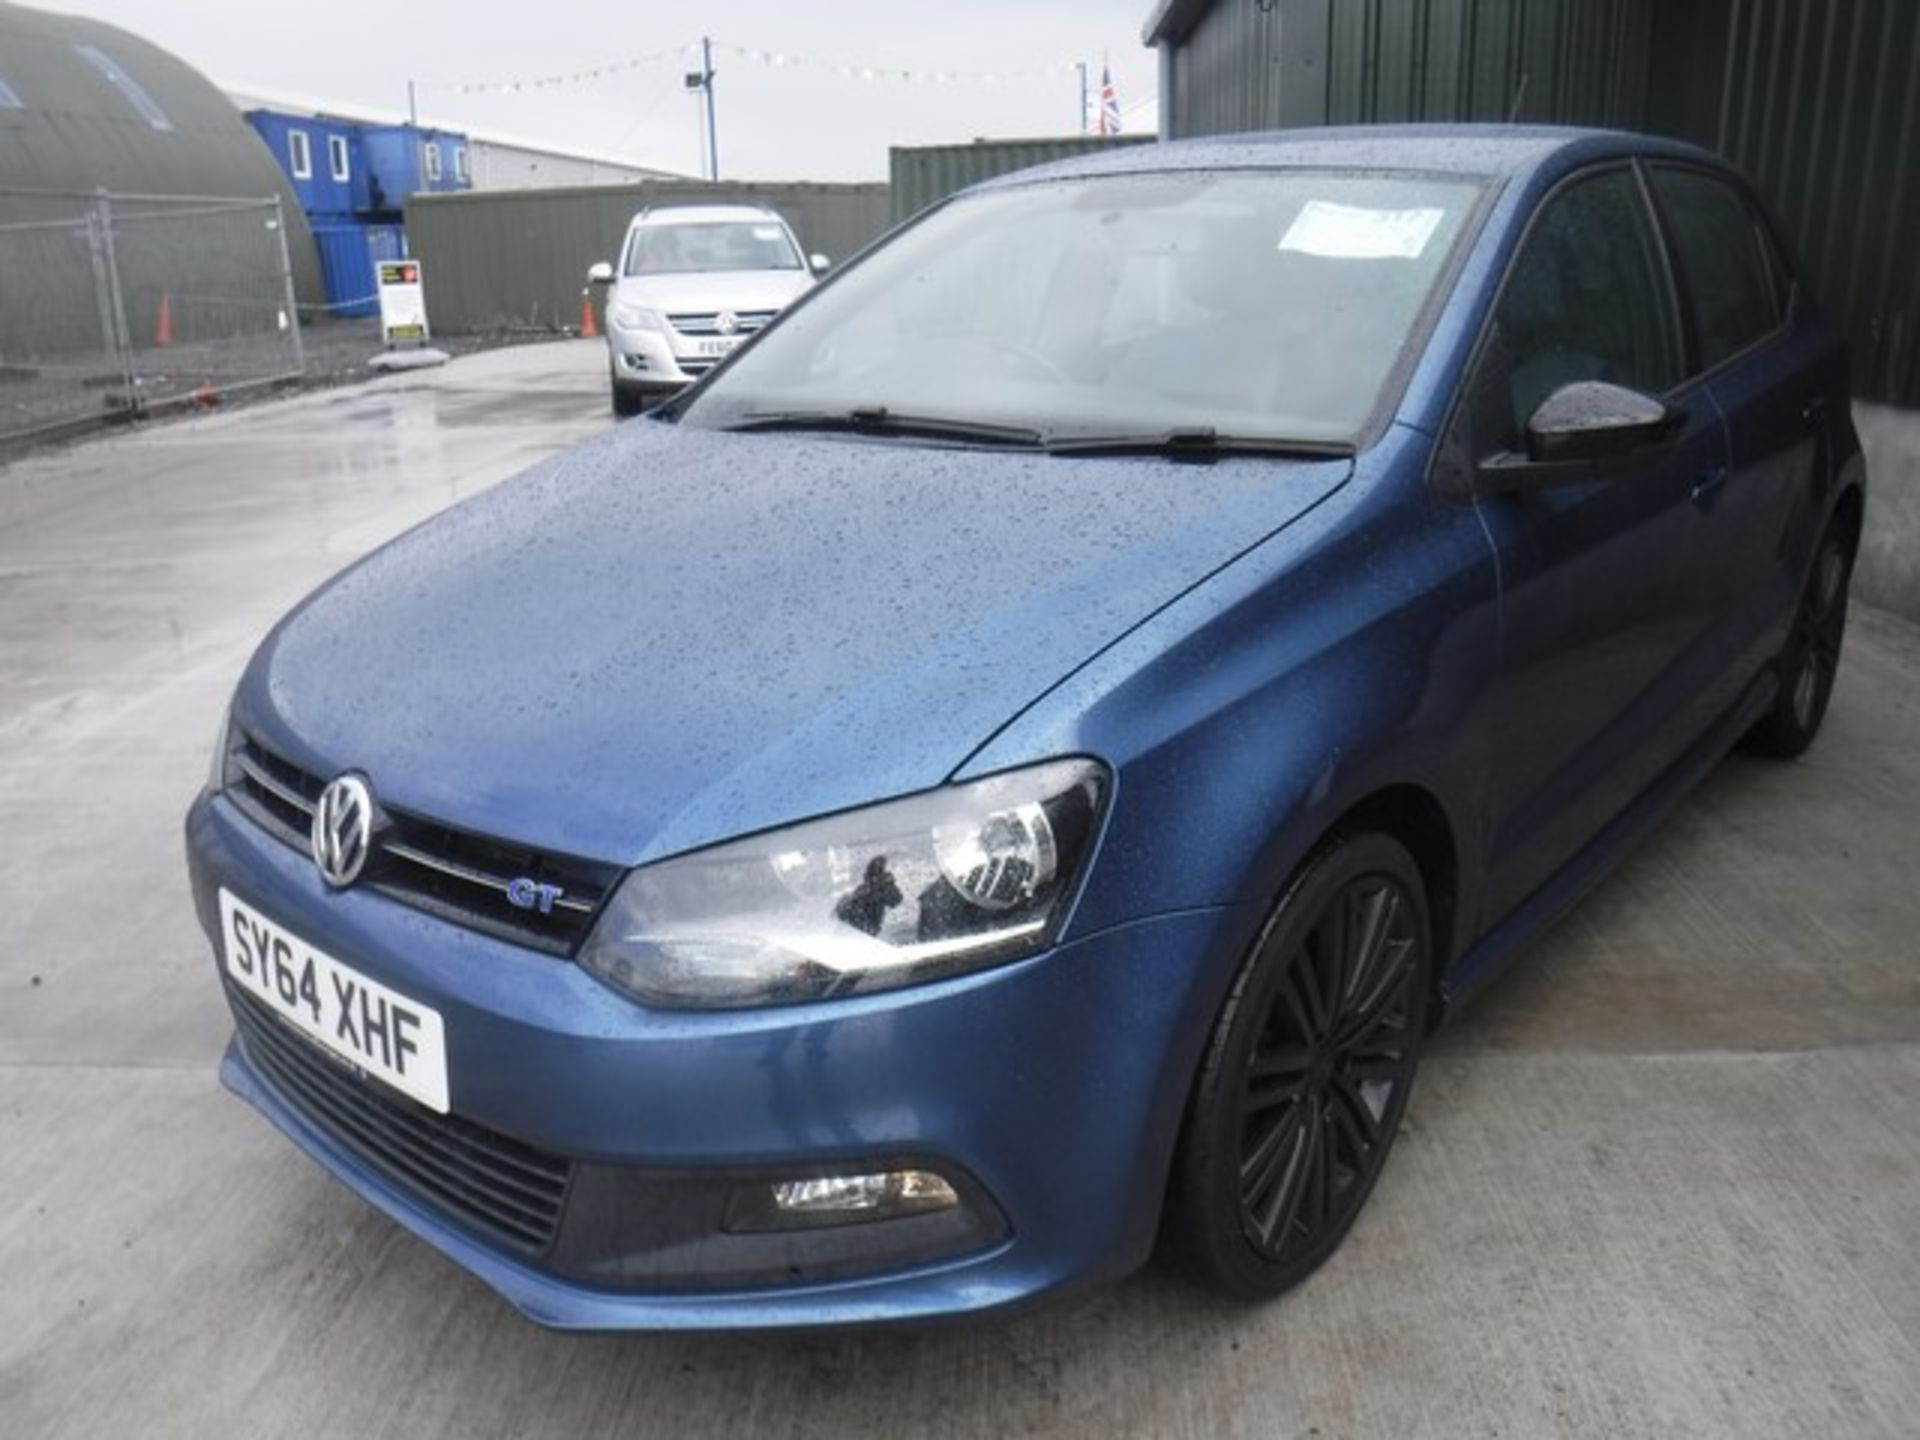 VOLKSWAGEN POLO BLUEGT - 1395cc - Image 8 of 8